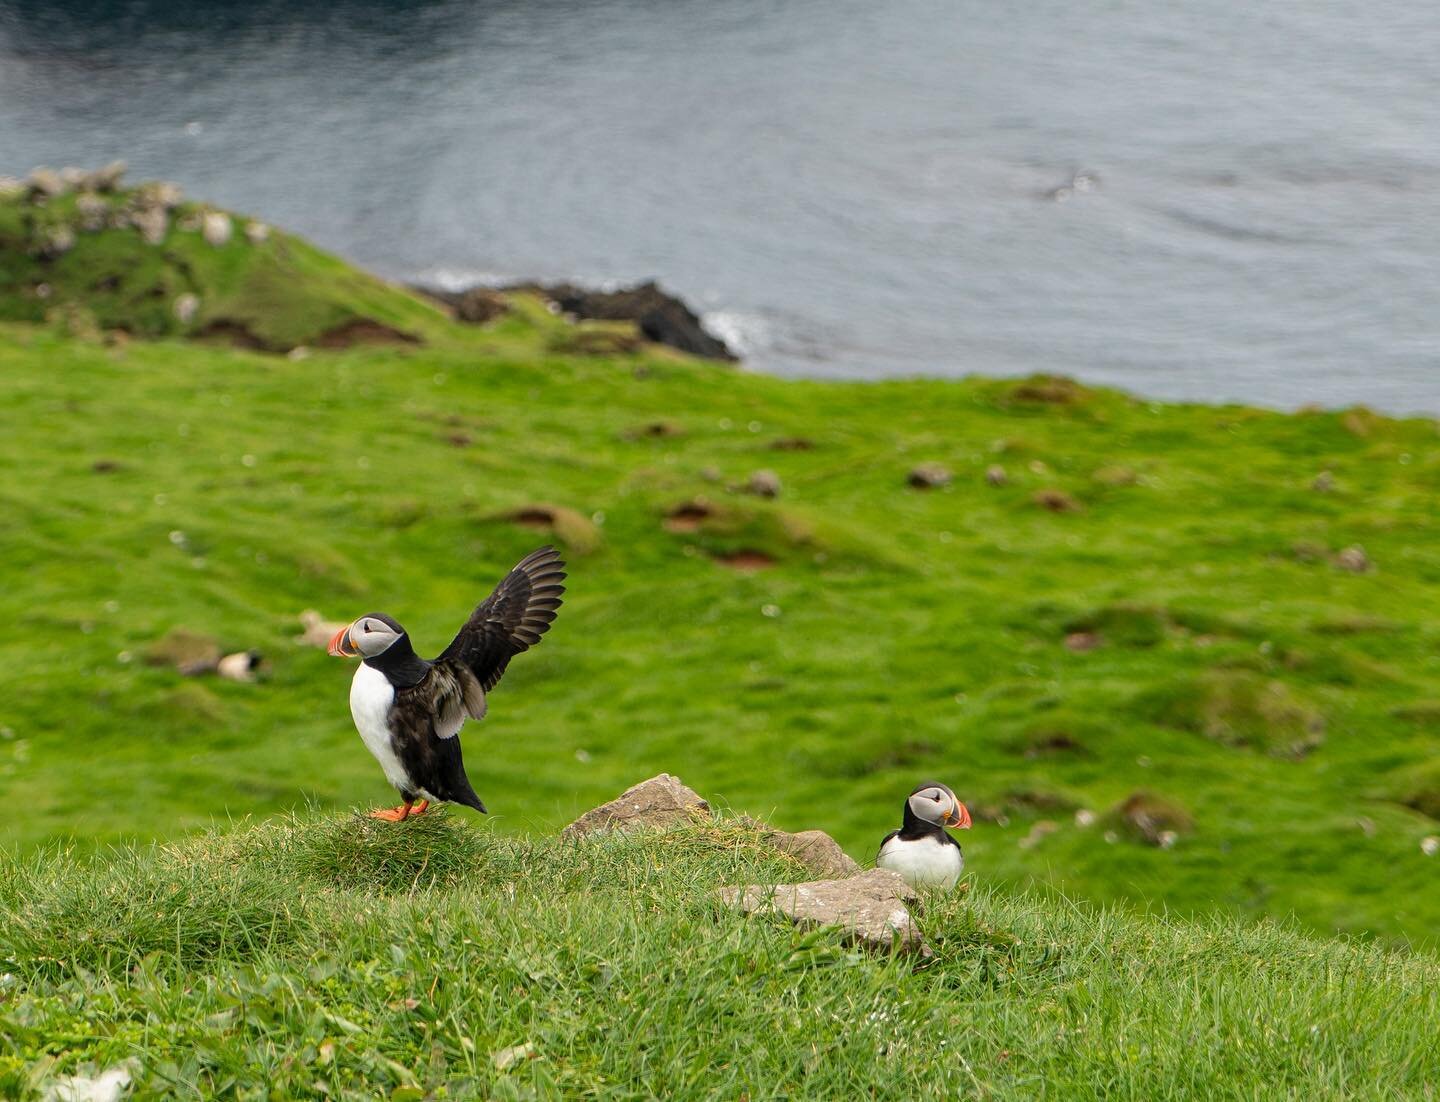 NEW BLOG POST (link in profile)!
No trip to the Faroe Islands would be complete without a visit to Mykines, known to be a haven for seabirds. Hiking, ferrying, Puffin-ing&hellip;we had it all! Read more about our adventure on the blog (leavingsanity.